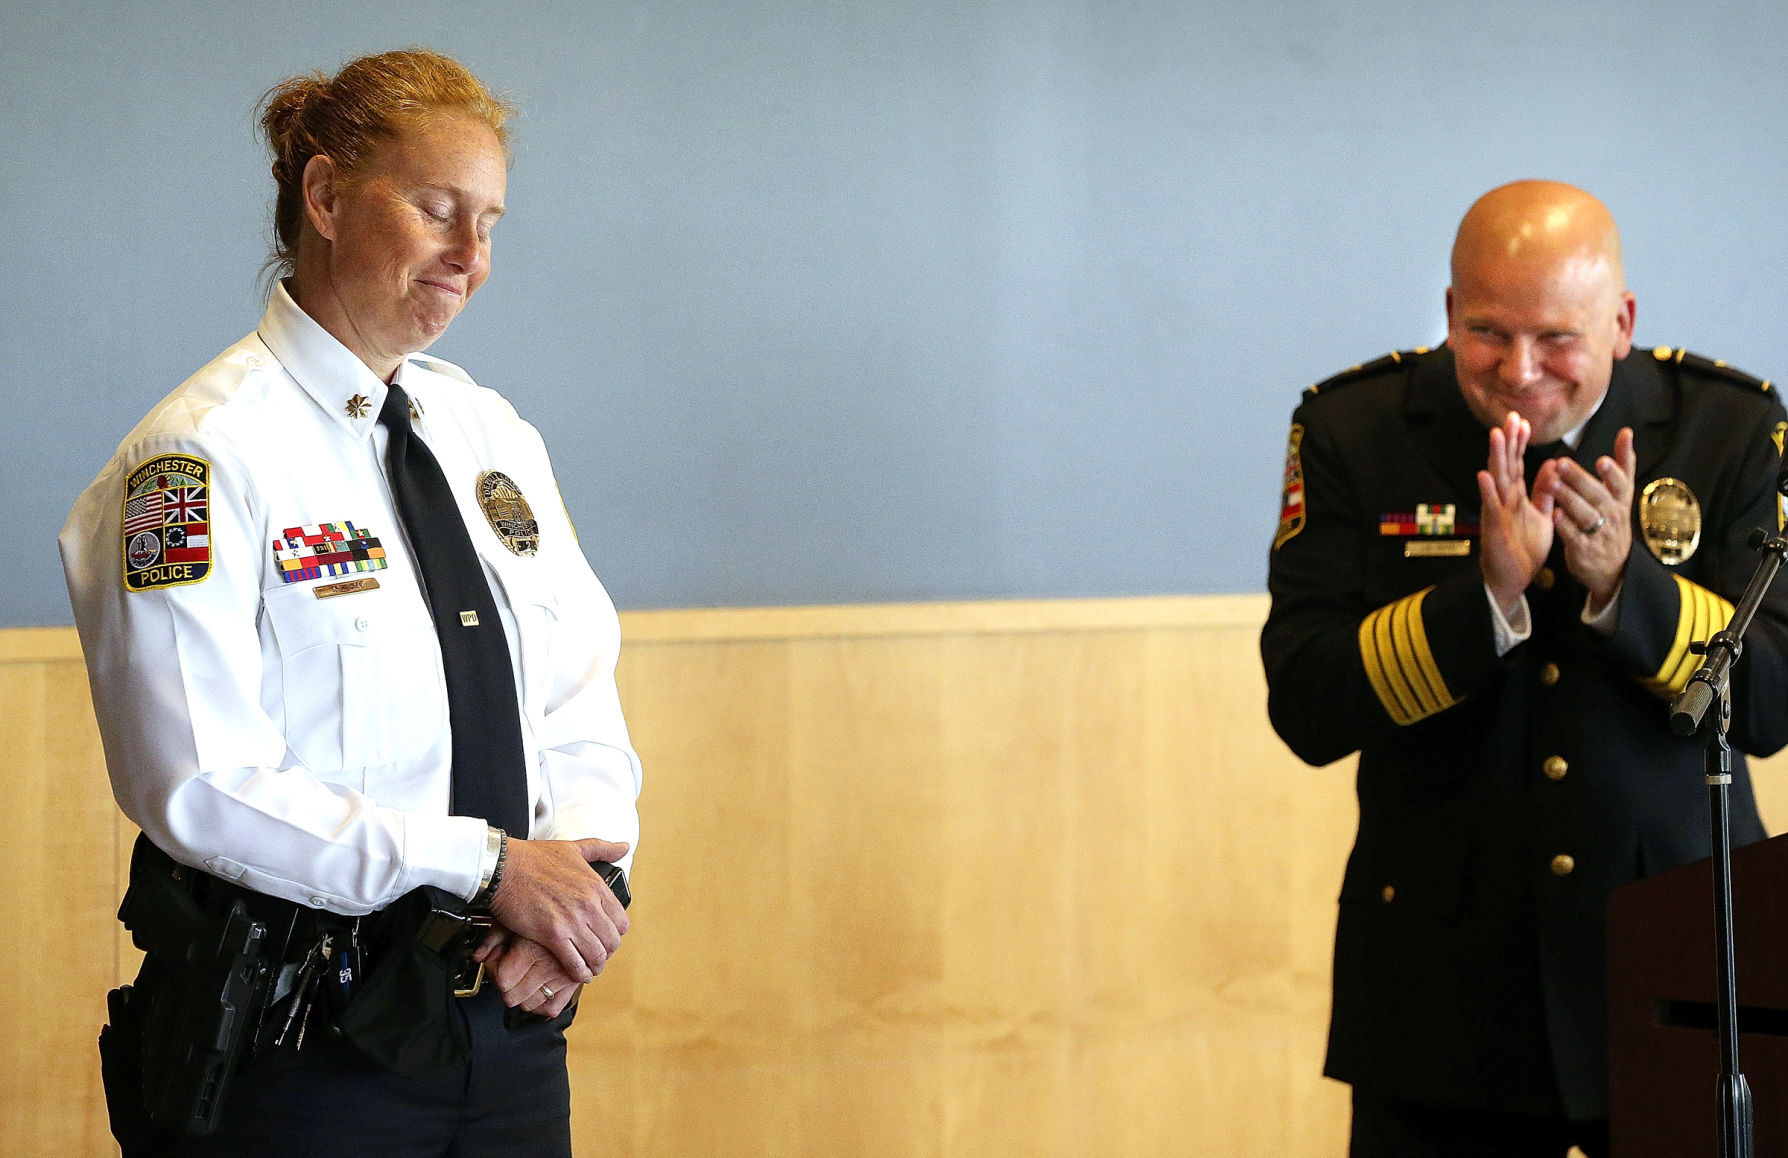 Officers saluted for courage under fire | Winchester Star